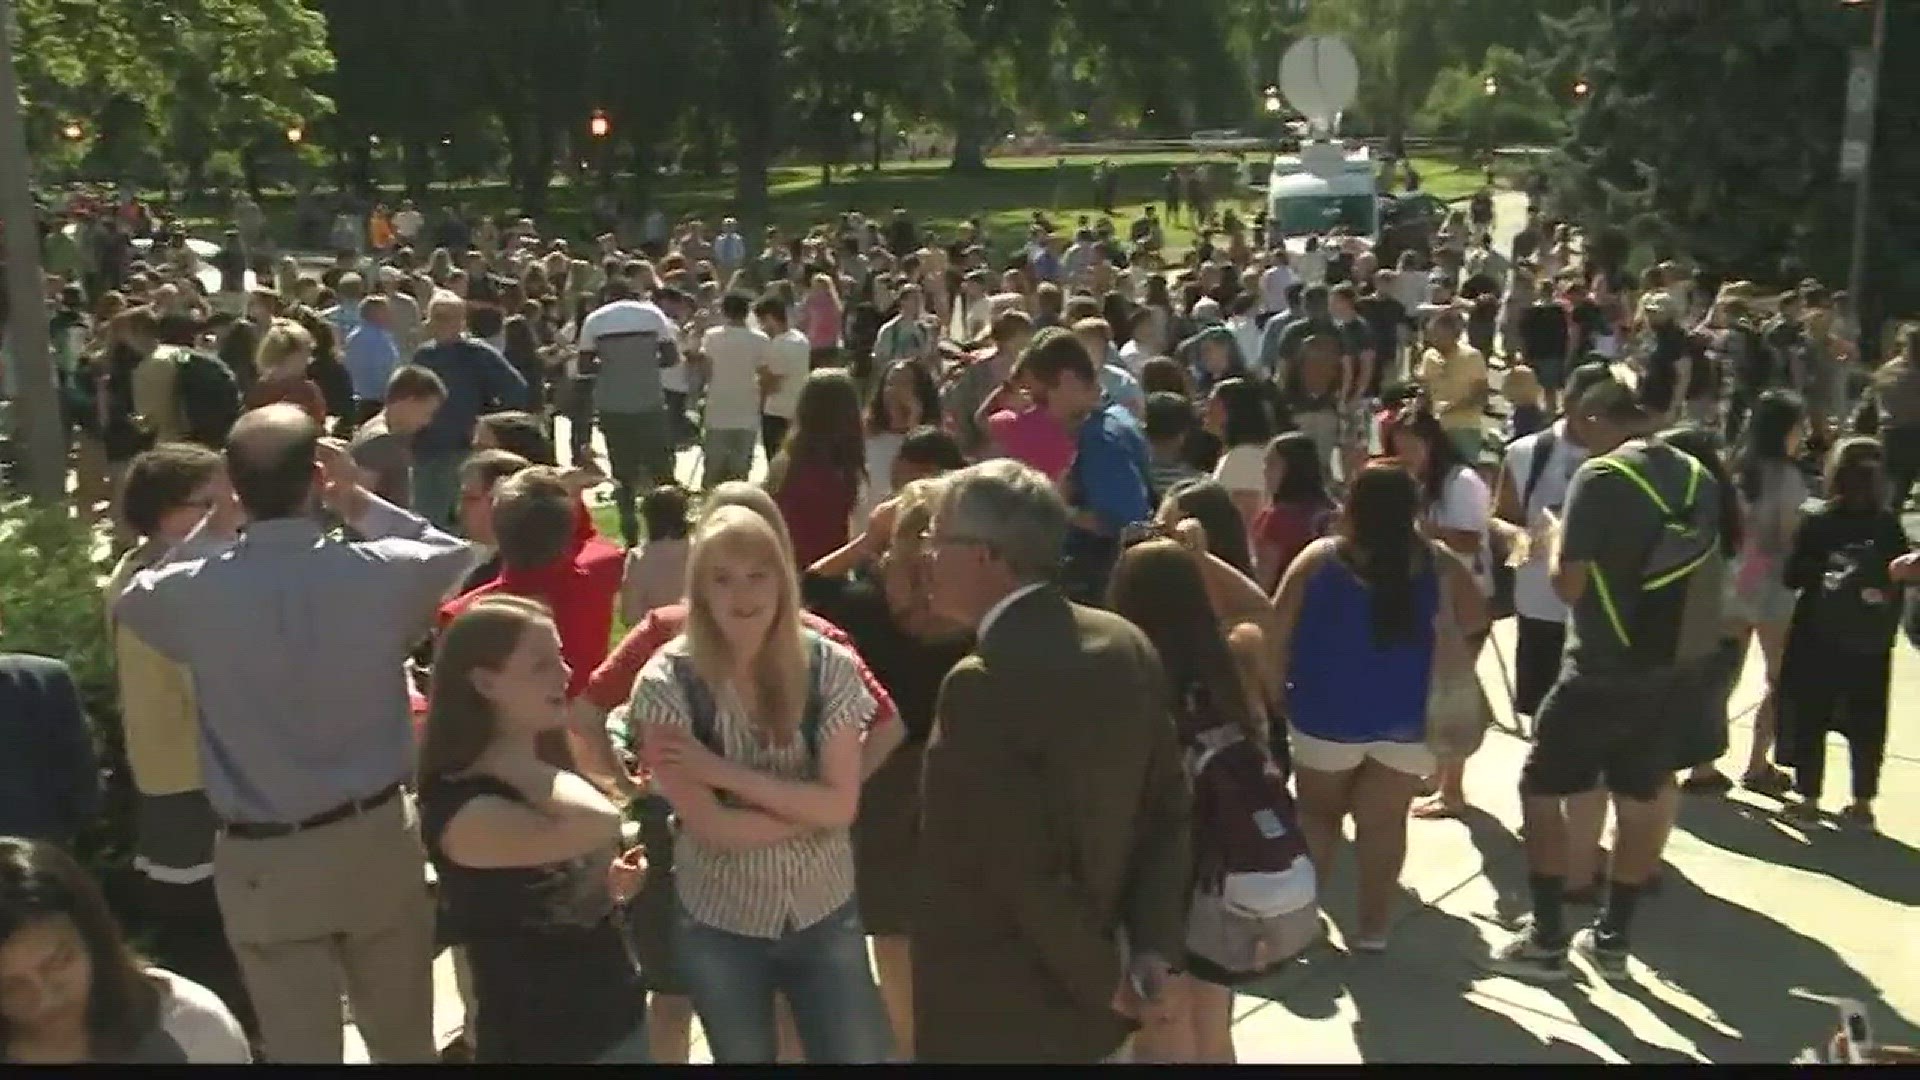 Eclipse viewing party at University of Idaho